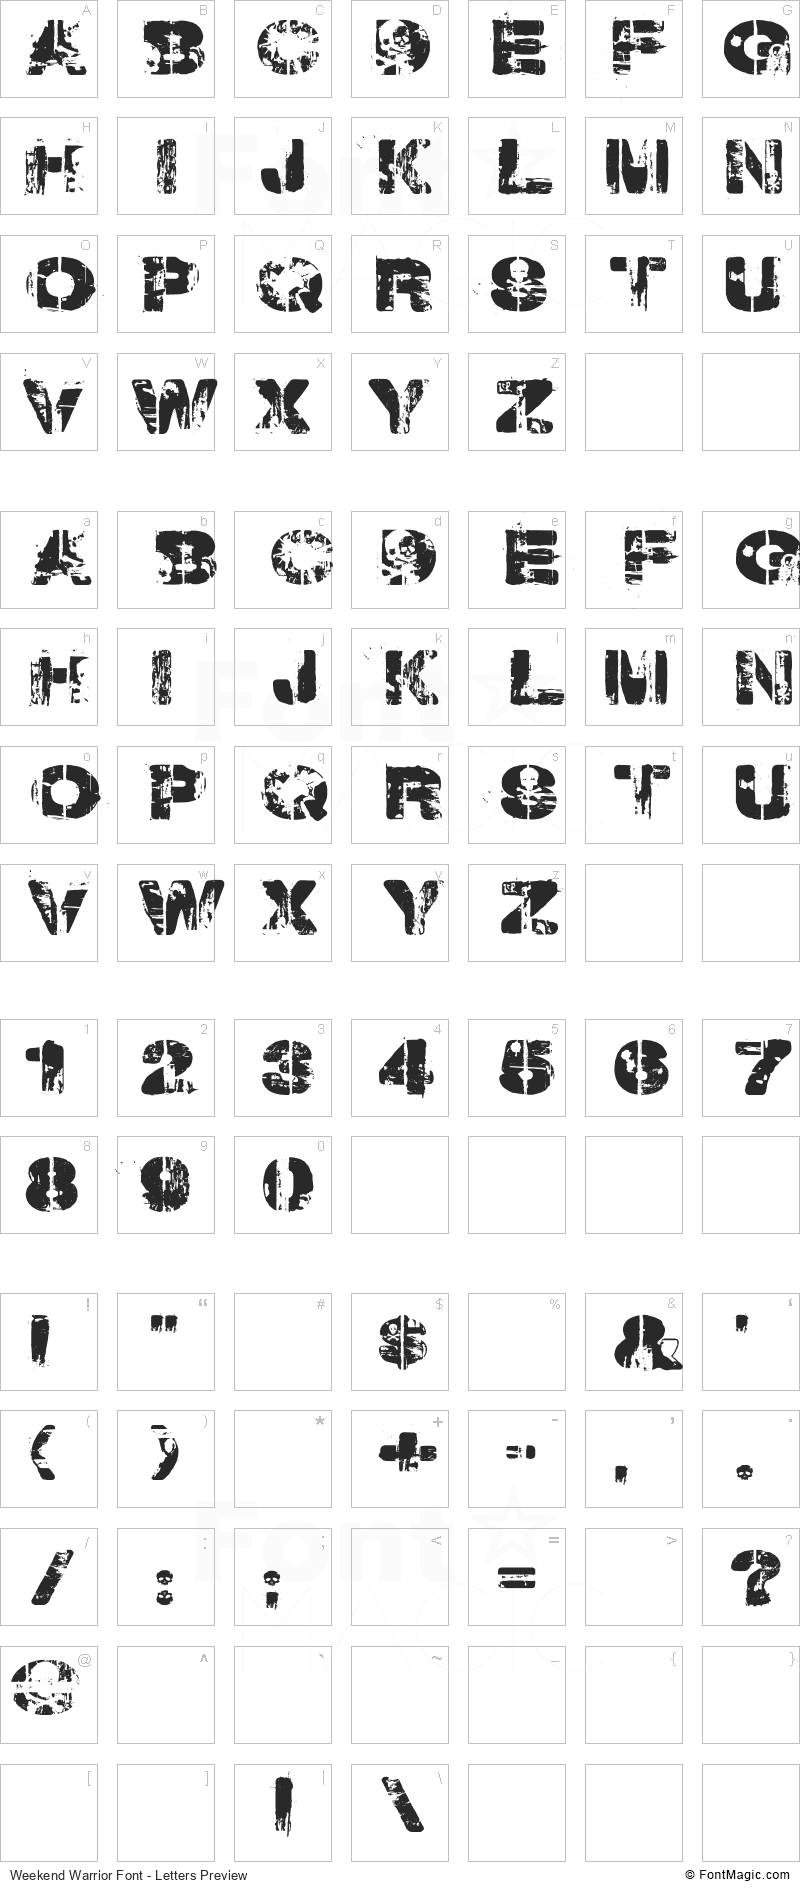 Weekend Warrior Font - All Latters Preview Chart